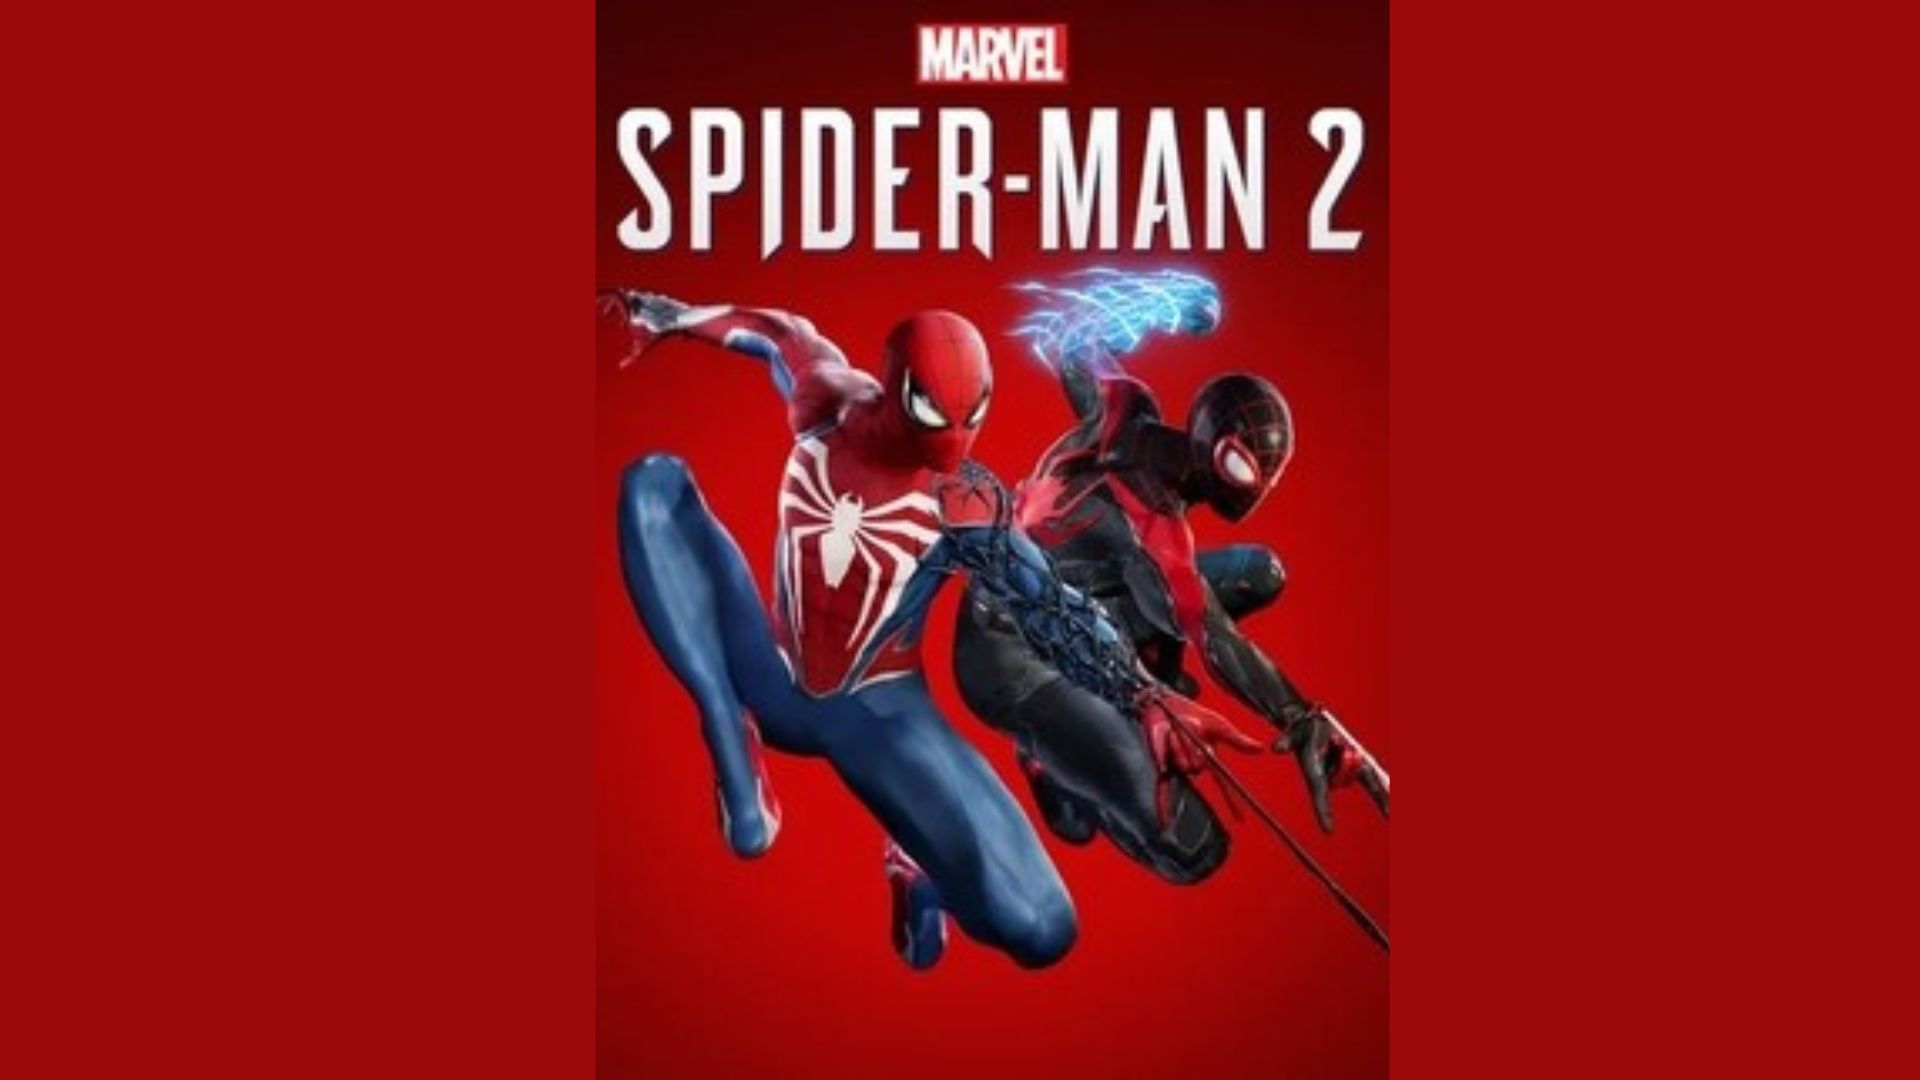 Spiderman PS5 Console: A Game Worth Playing?